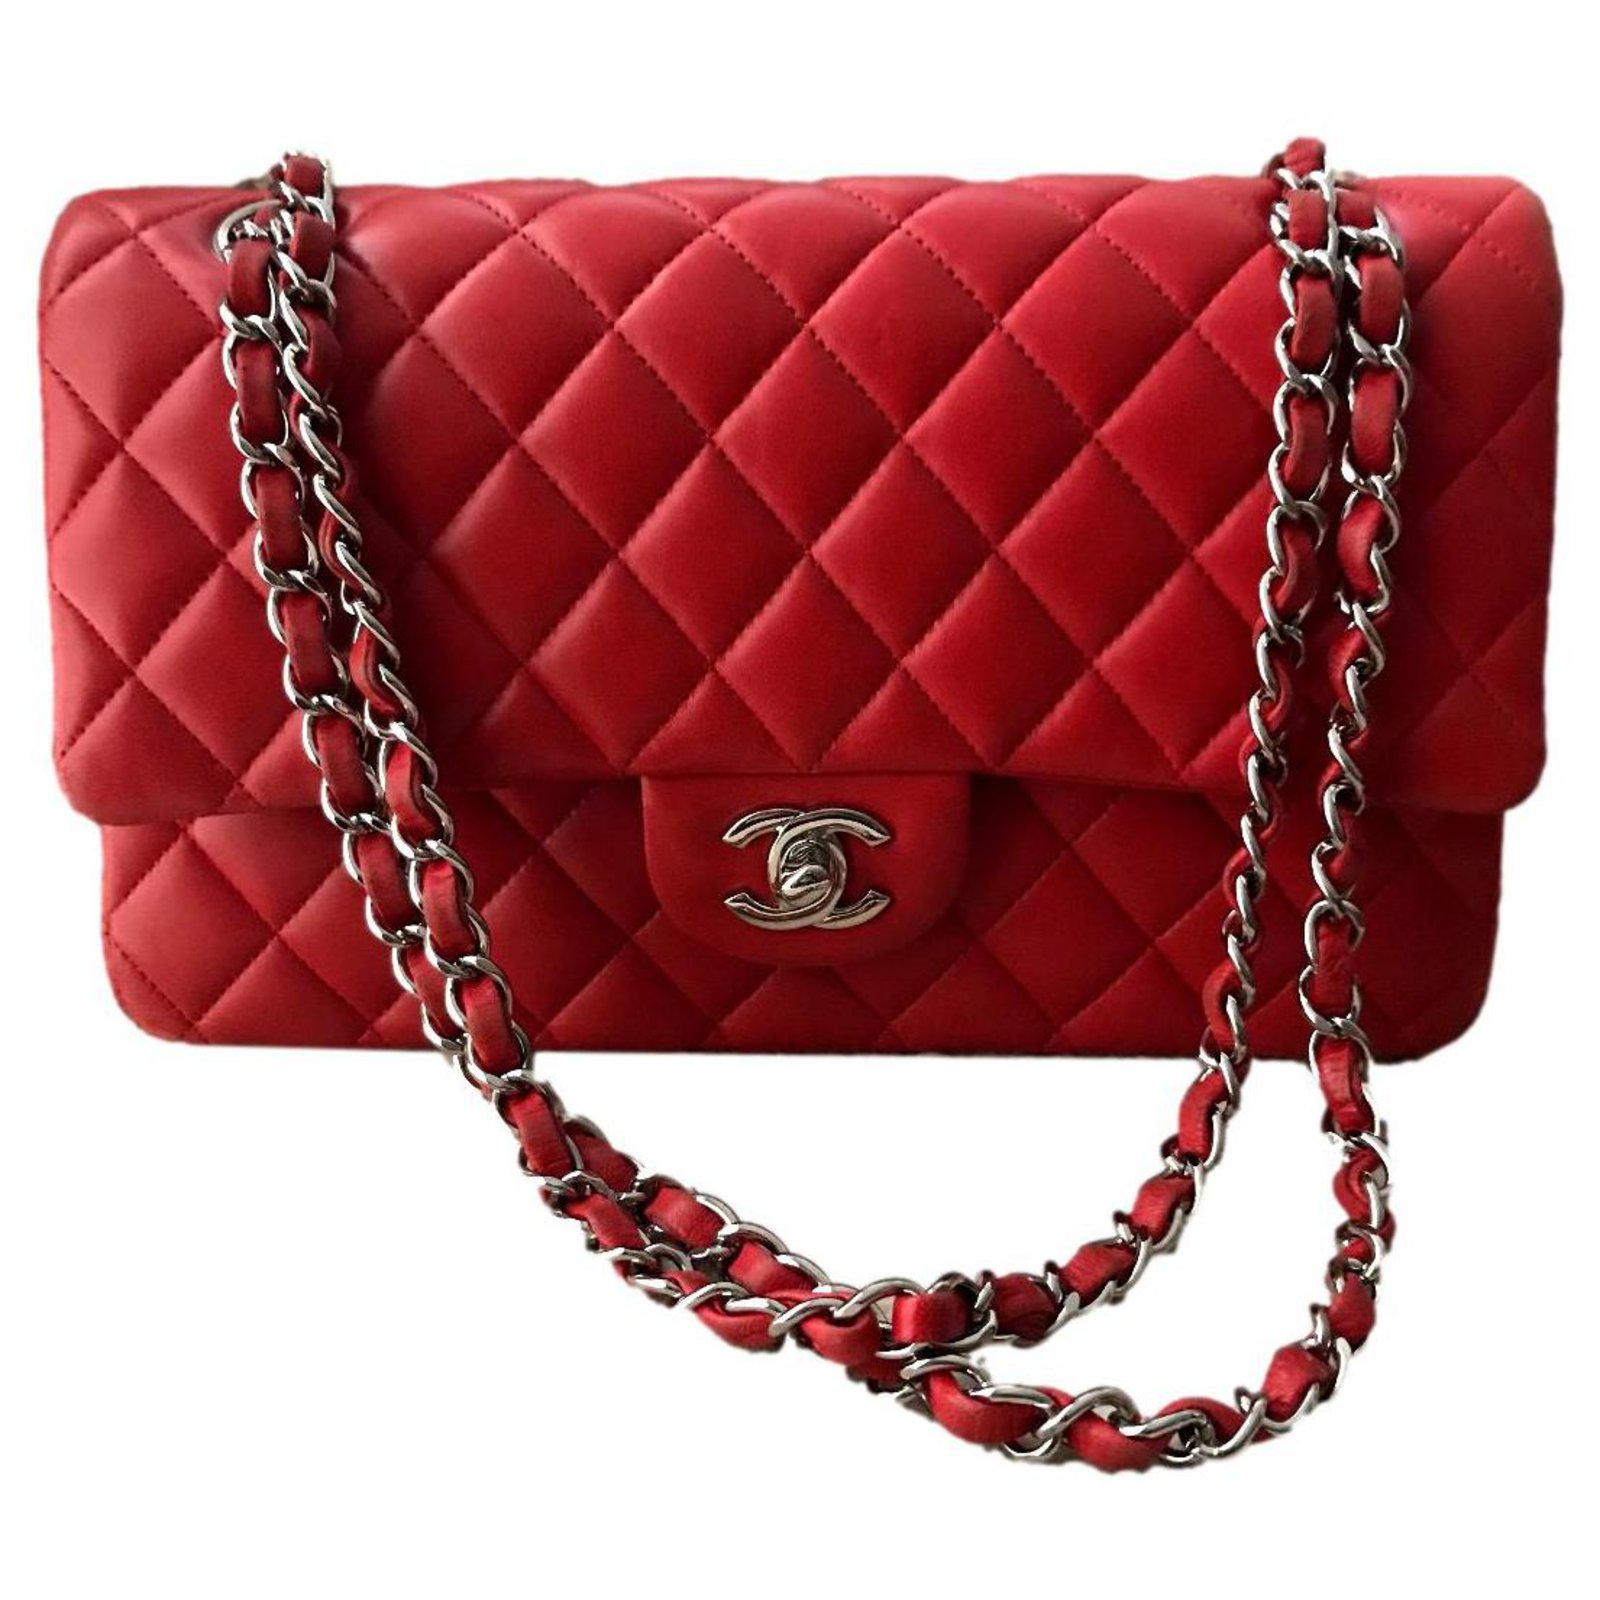 Chanel Classic Timeless Medium Red Leather Lambskin ref.300139